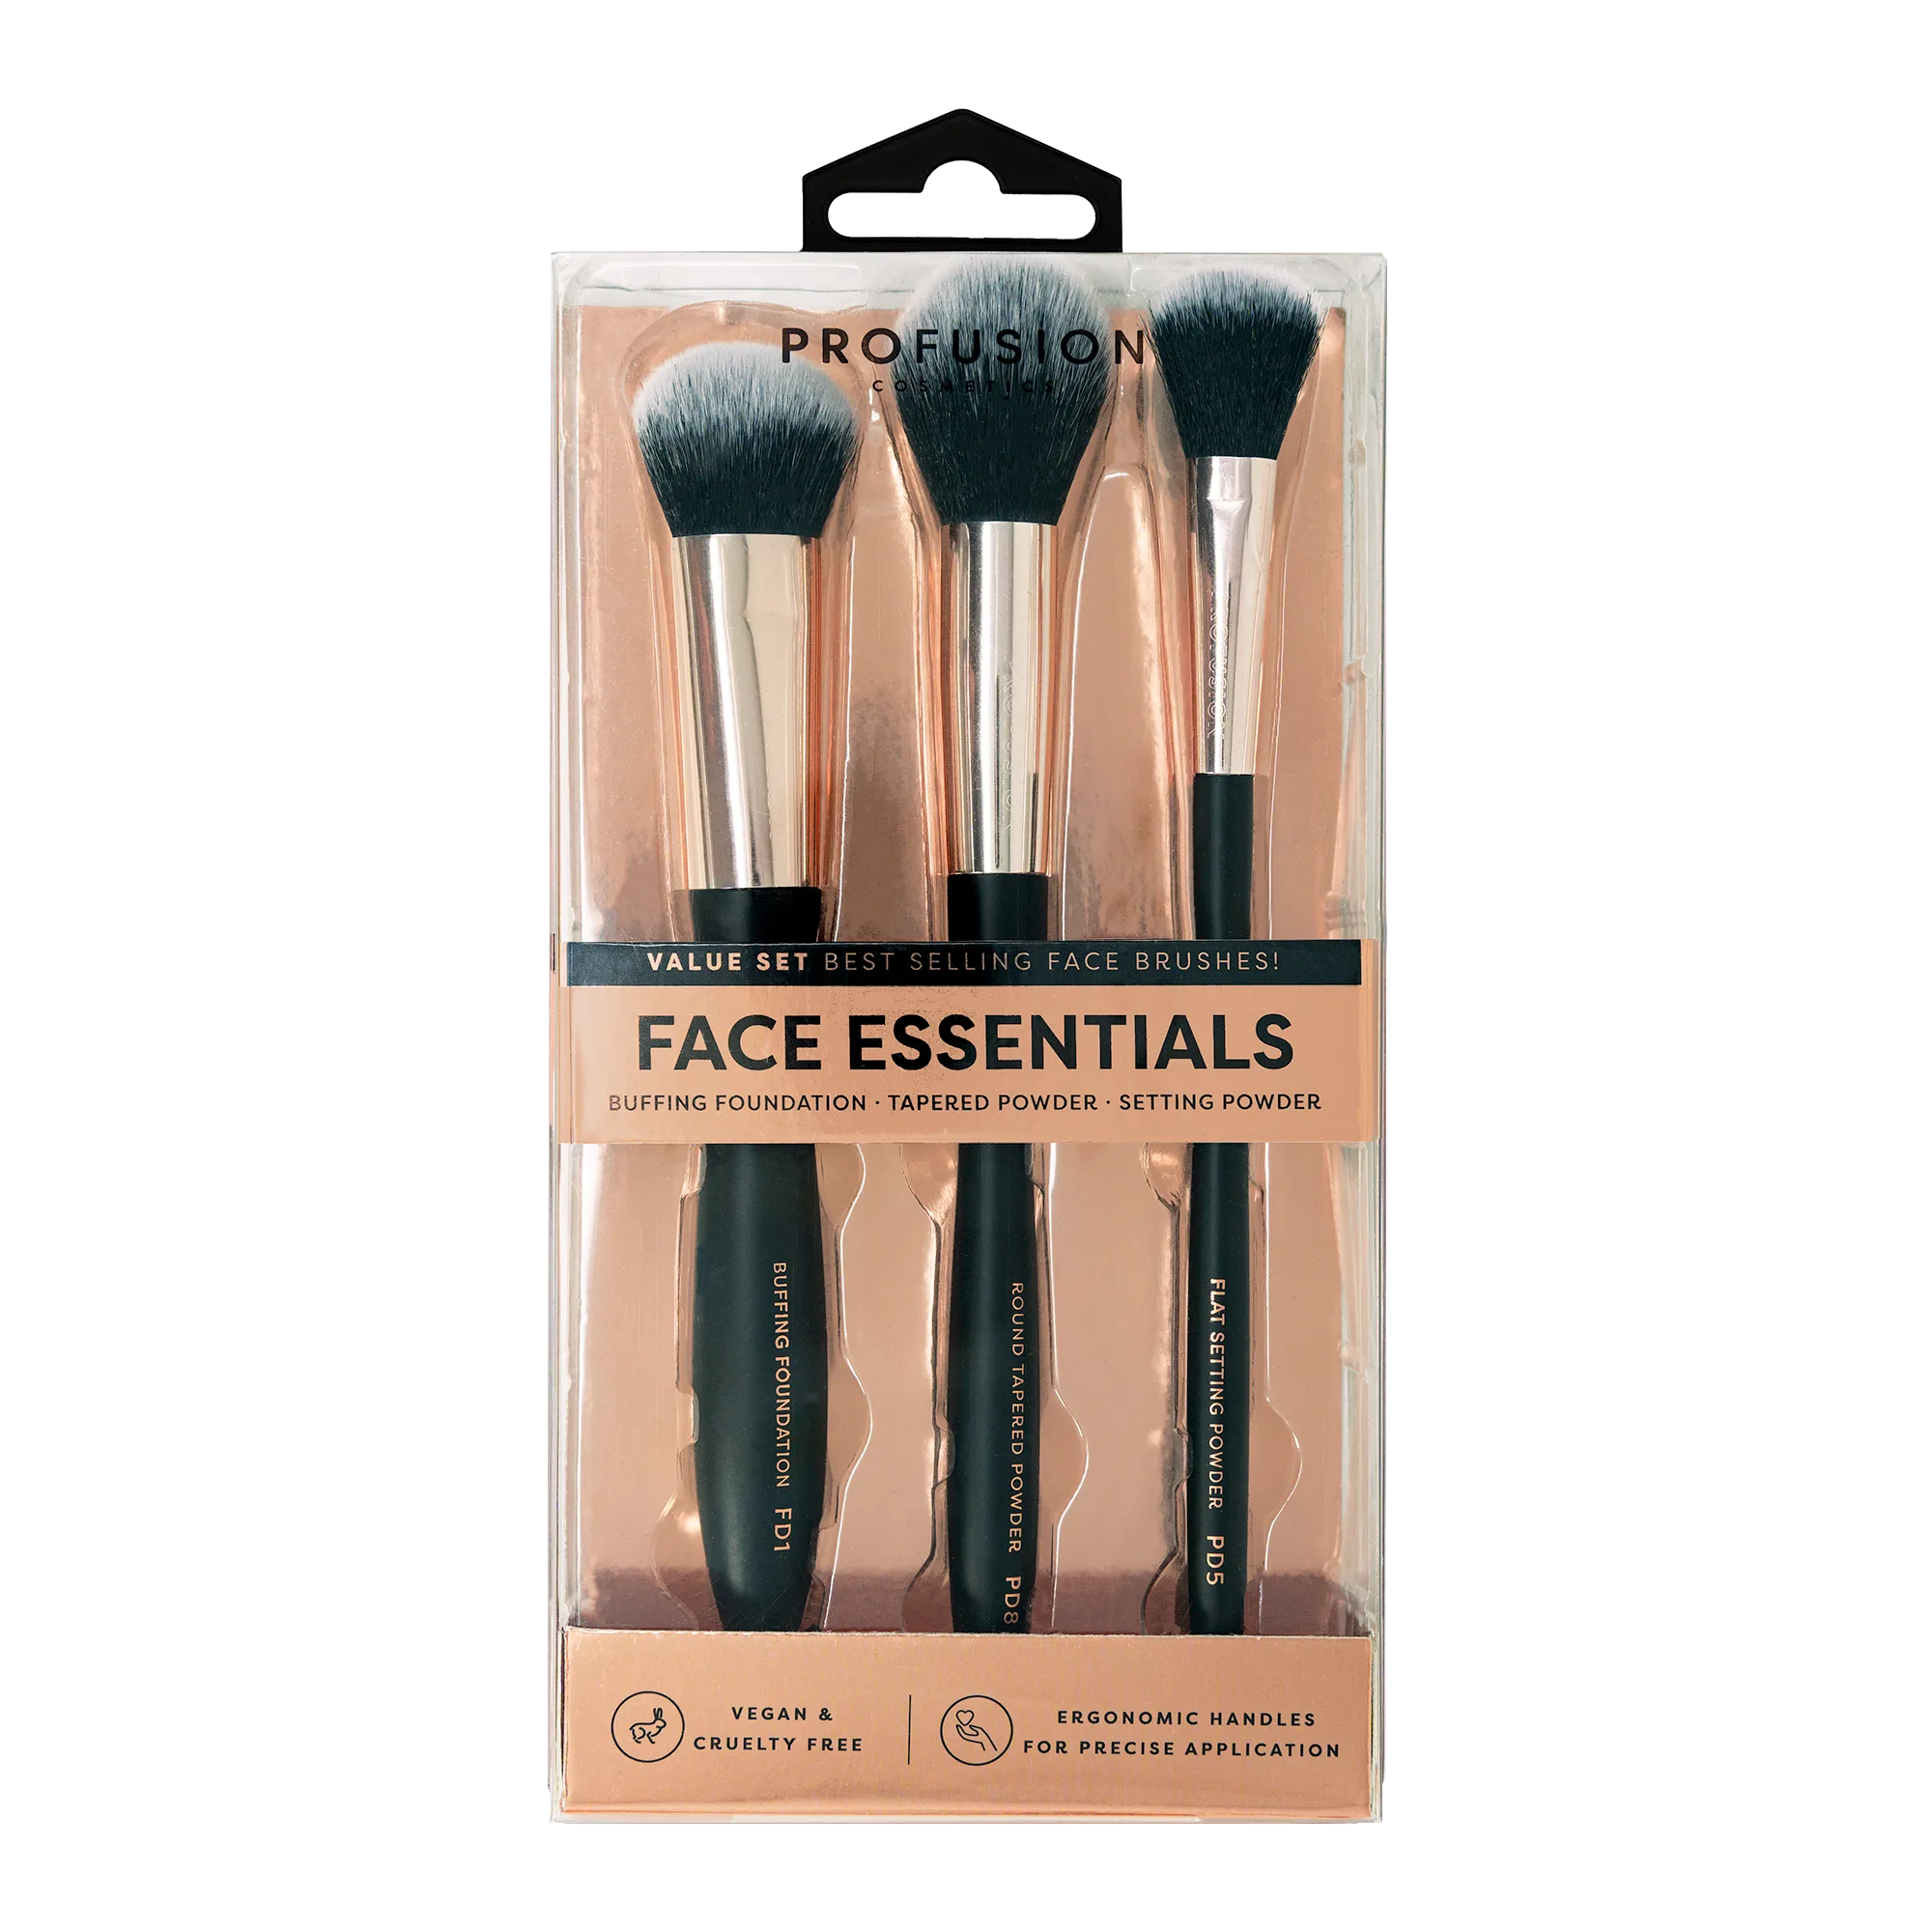 How to choose right brushes for face painting?